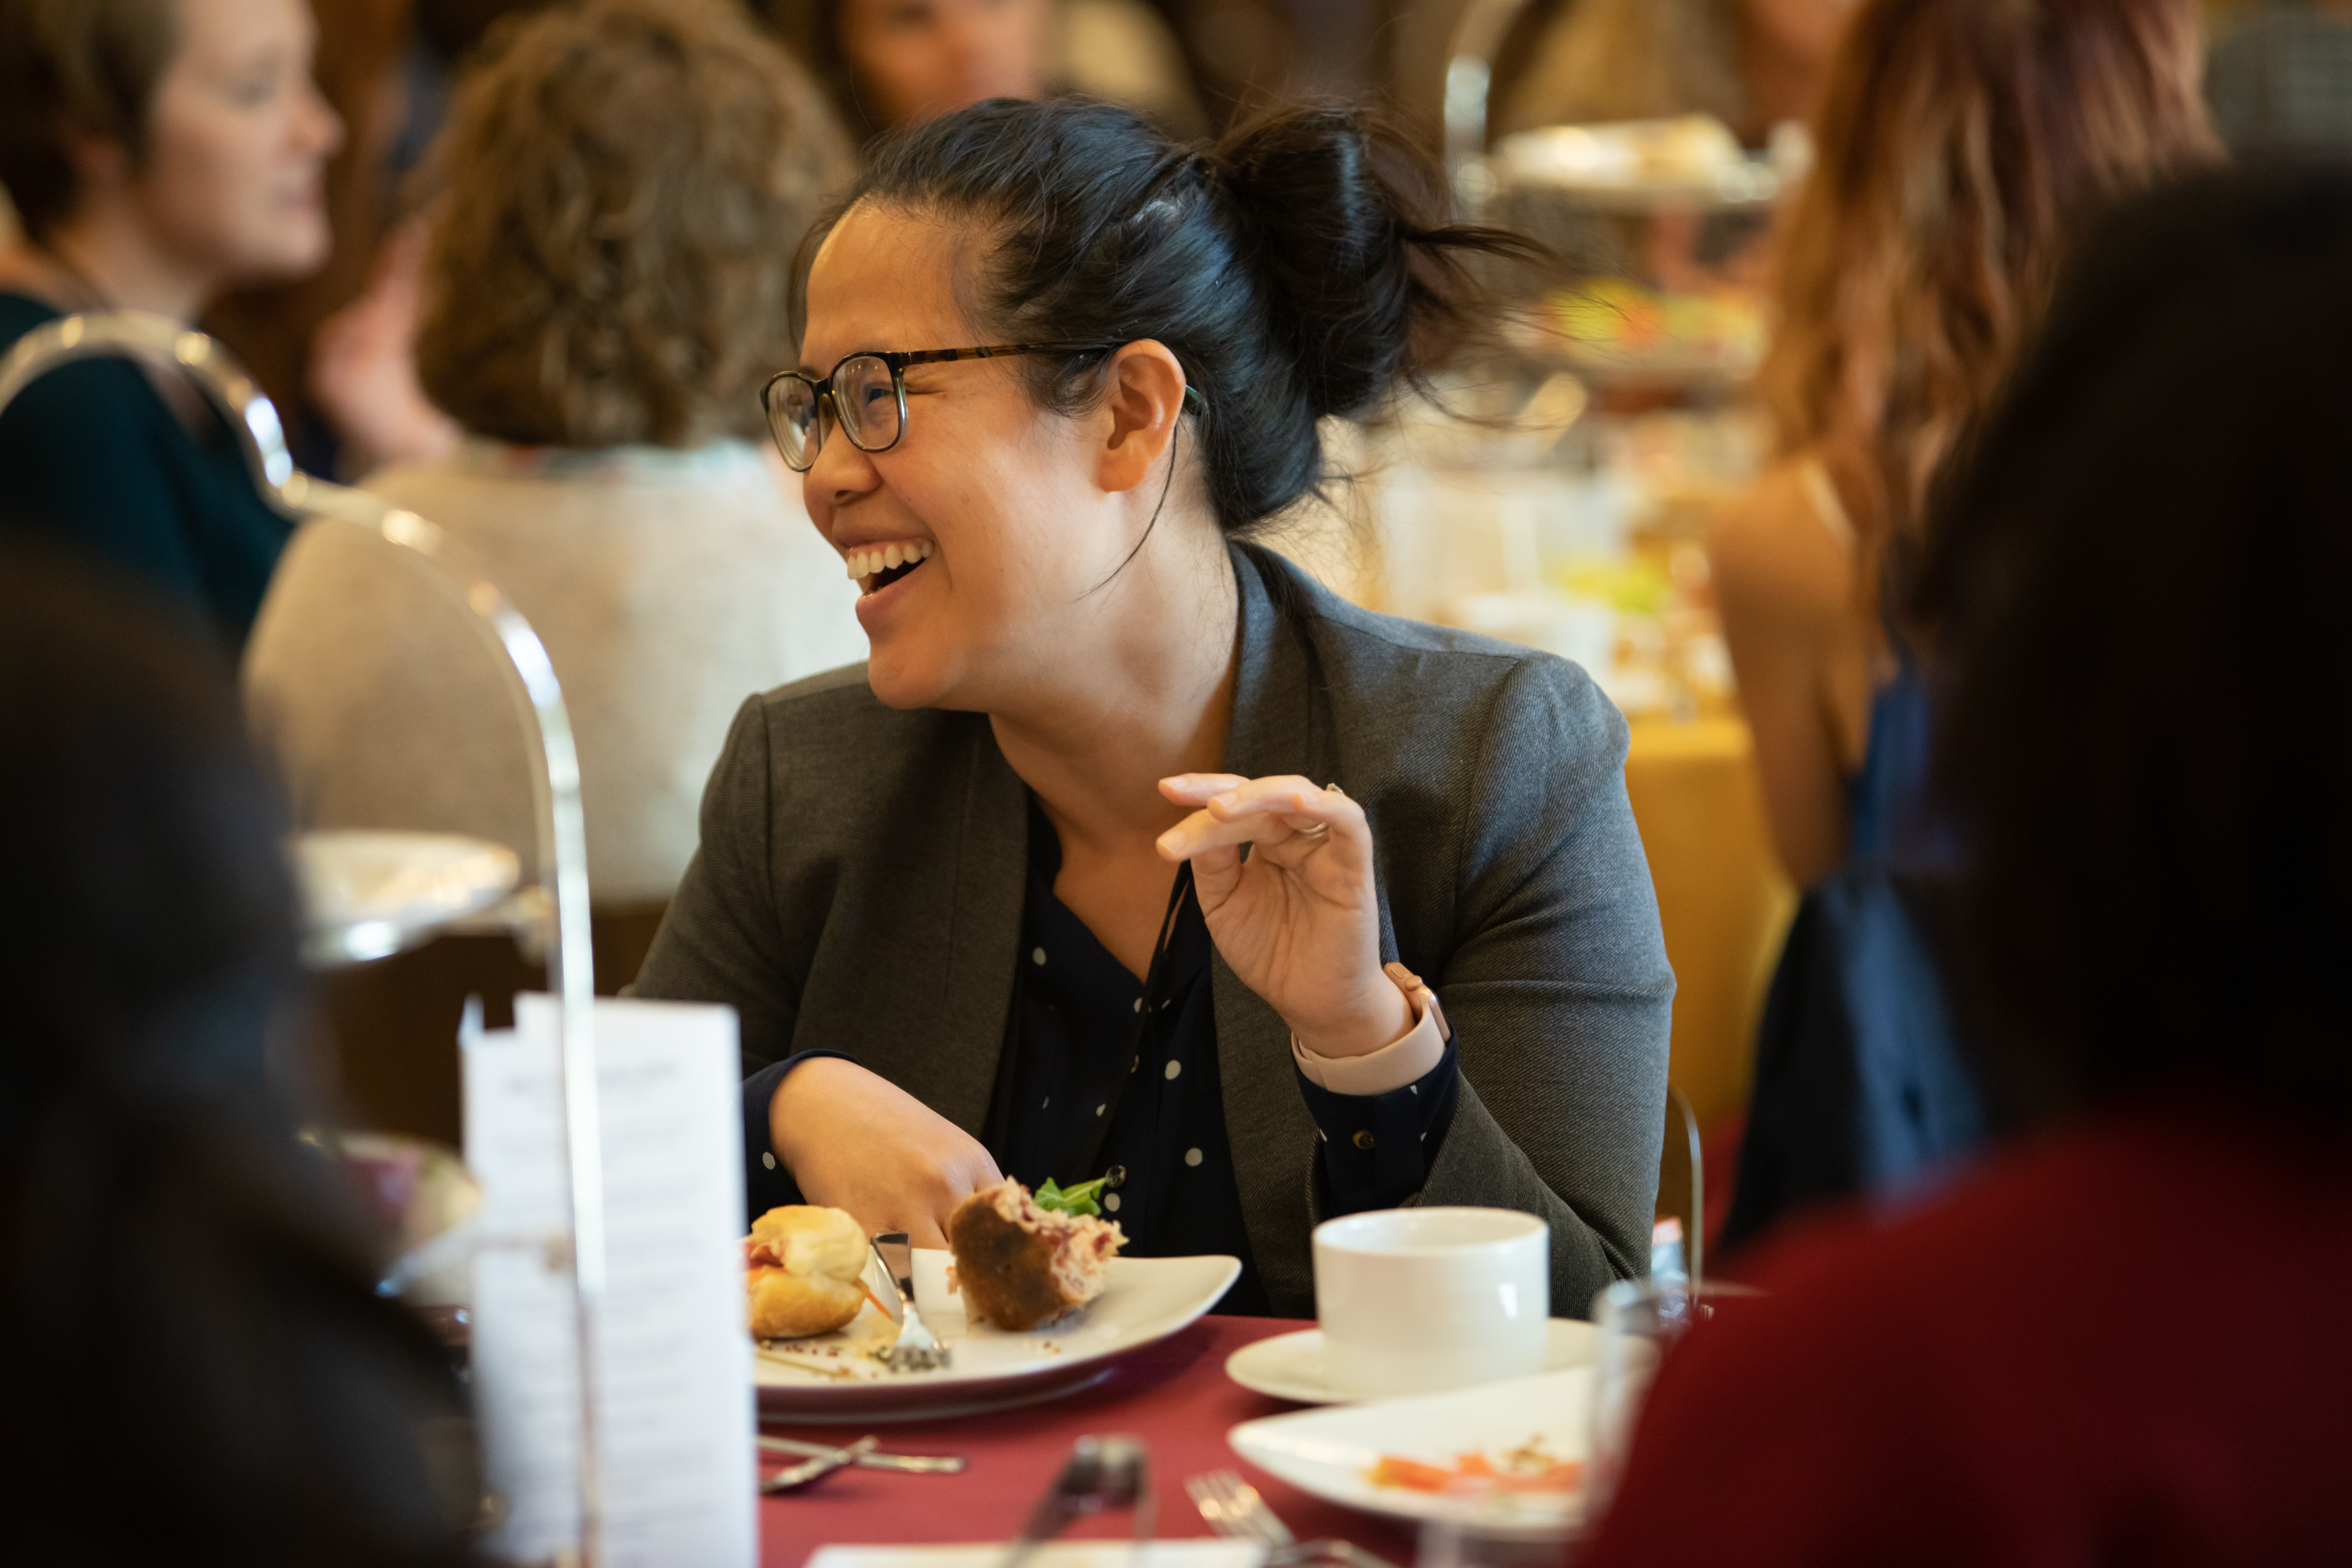 Conference attendee enjoys lunch and a laugh